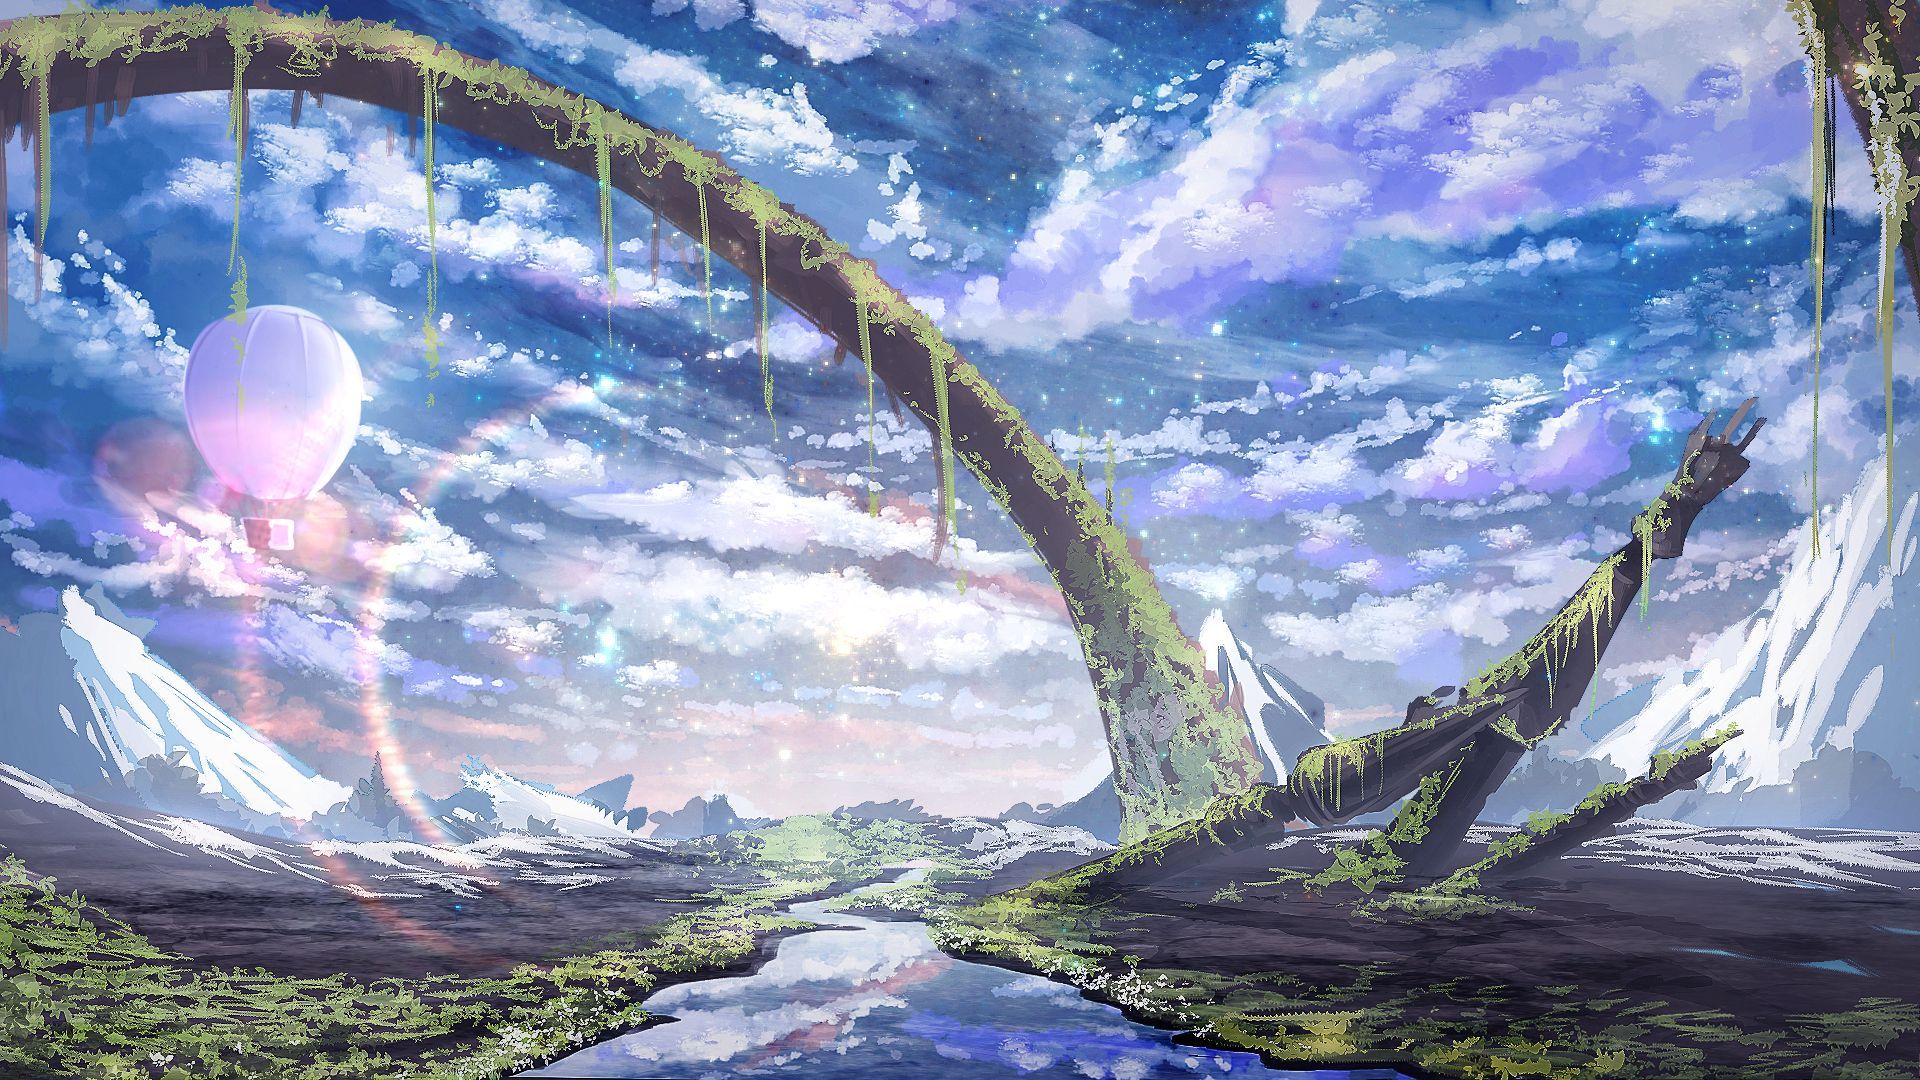 Anime Scenery Wallpaper 48 images